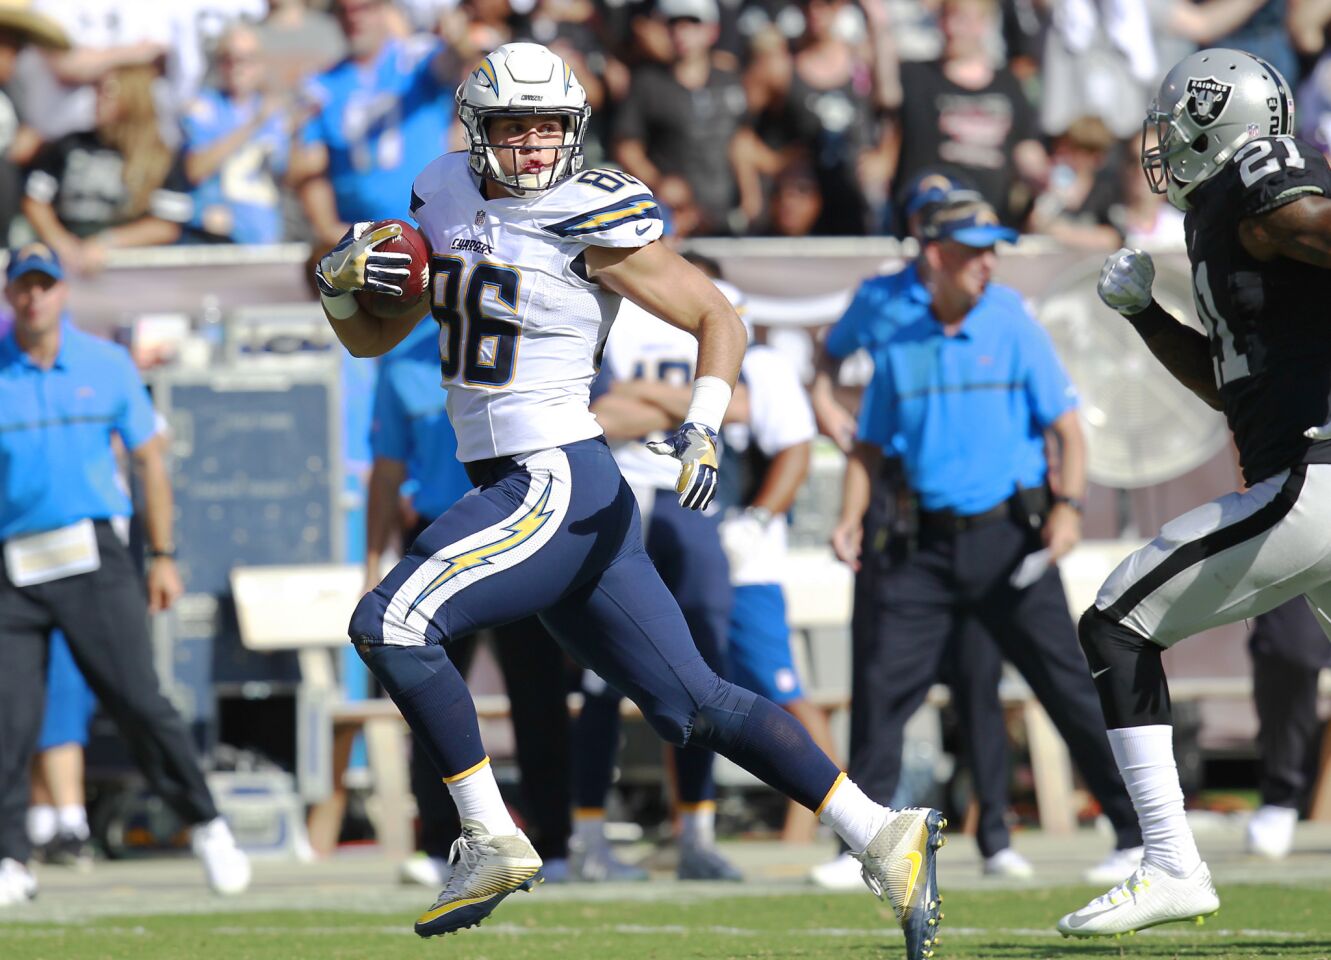 San Diego Chargers Hunter Henry gets taken down by Raiders Sean Smith in the 3rd quarter in Oakland on Oct. 9, 2016. (Photo by K.C. Alfred/The San Diego Union-Tribune)